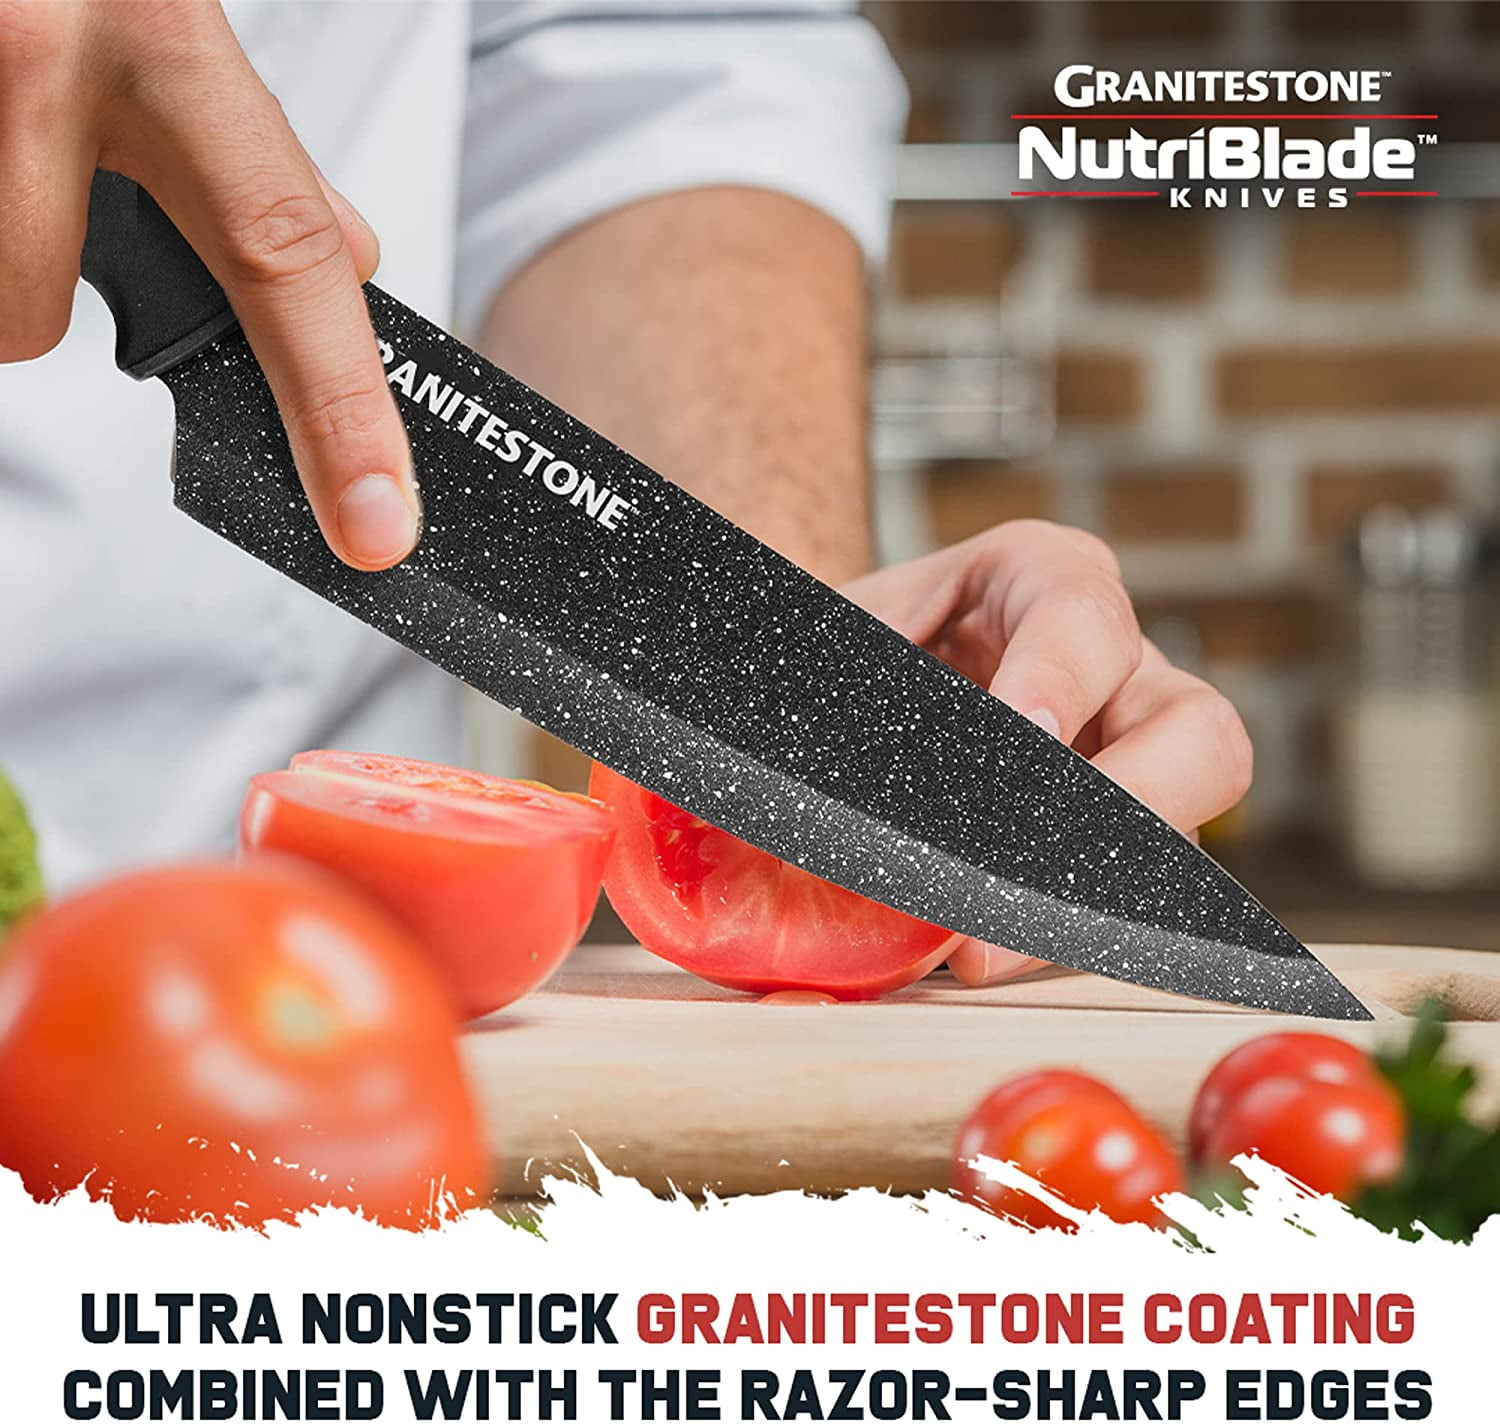 Nutriblade 12 Piece Knife Set with Block by Granitestone High-Grade  Professional Chef Knife, Santoku Knives, Kitchen Knife with Easy-Grip  Handles